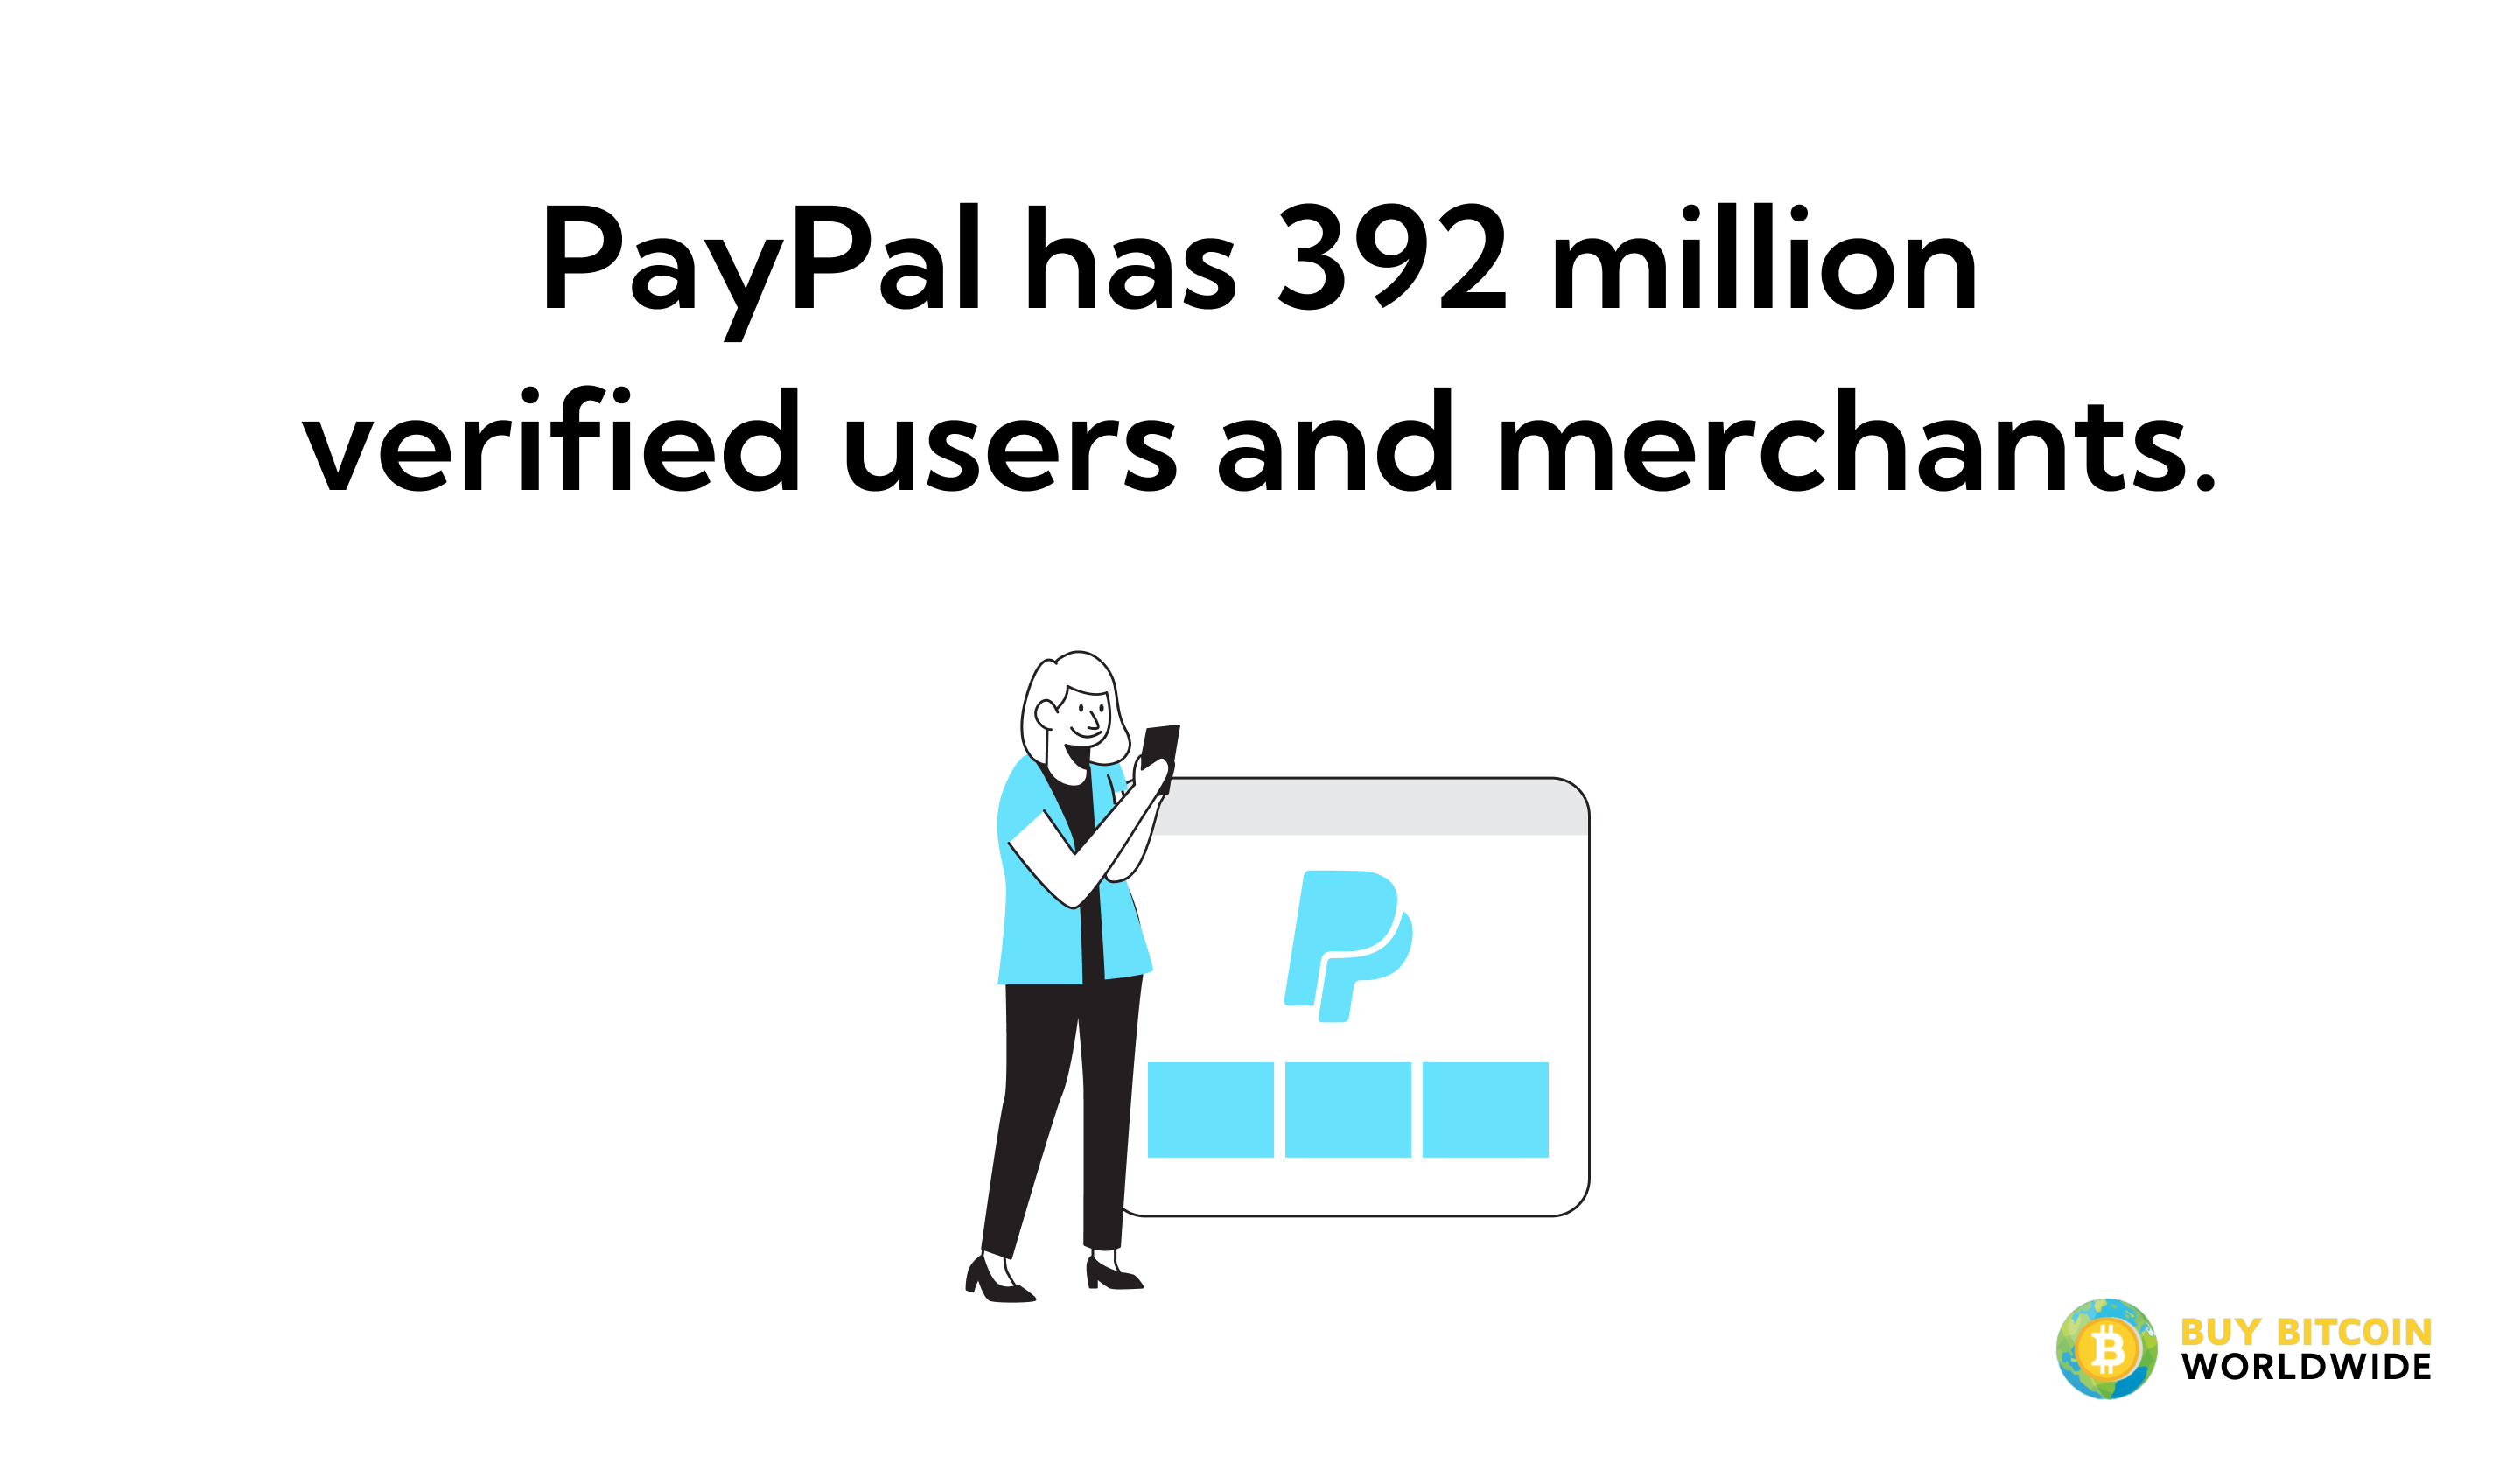 paypal has 392 million verified users in 2021